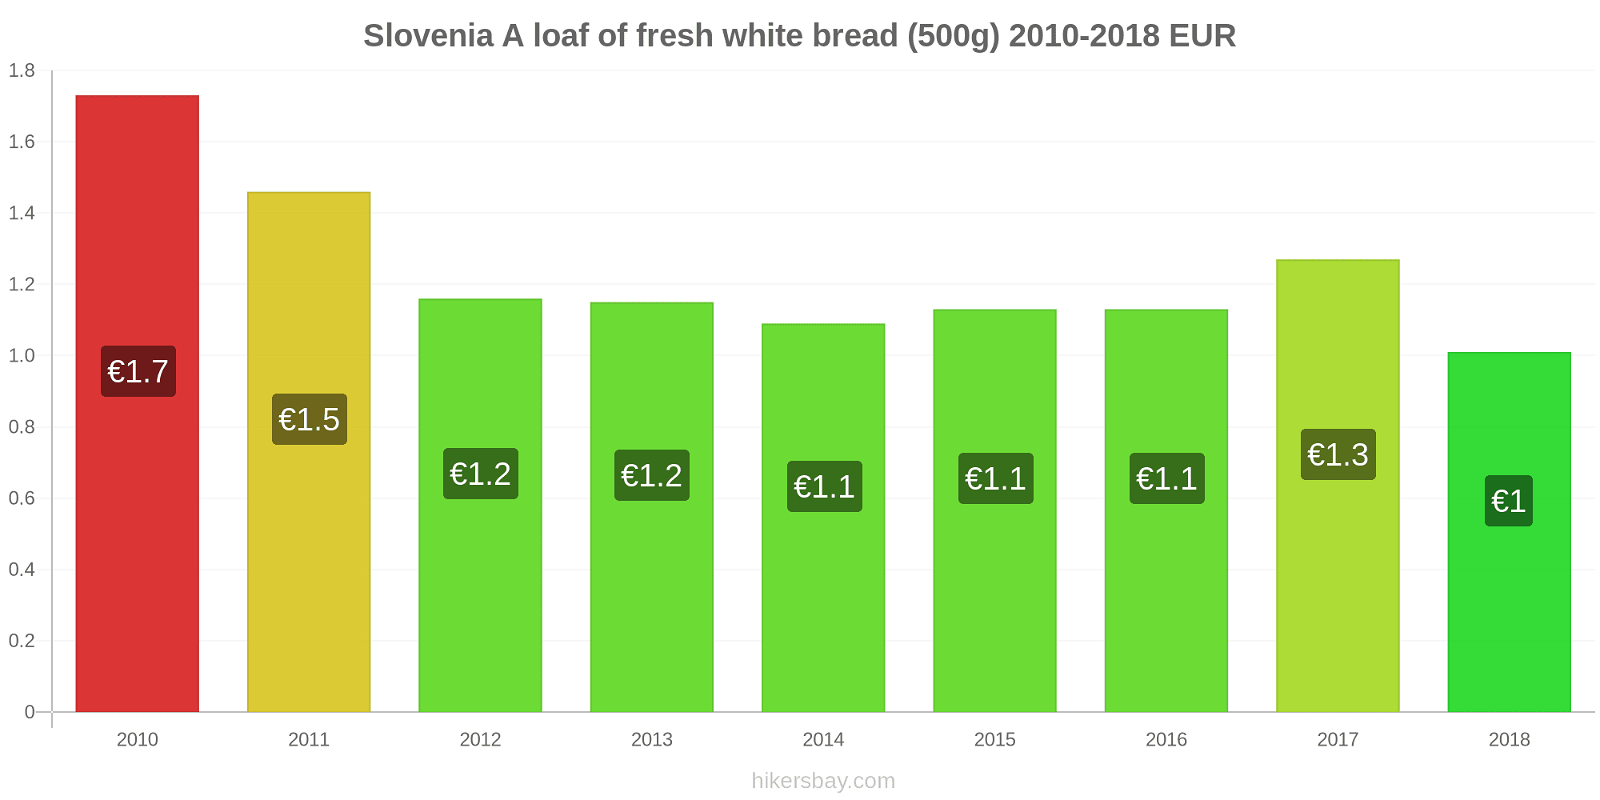 Slovenia price changes A loaf of fresh white bread (500g) hikersbay.com